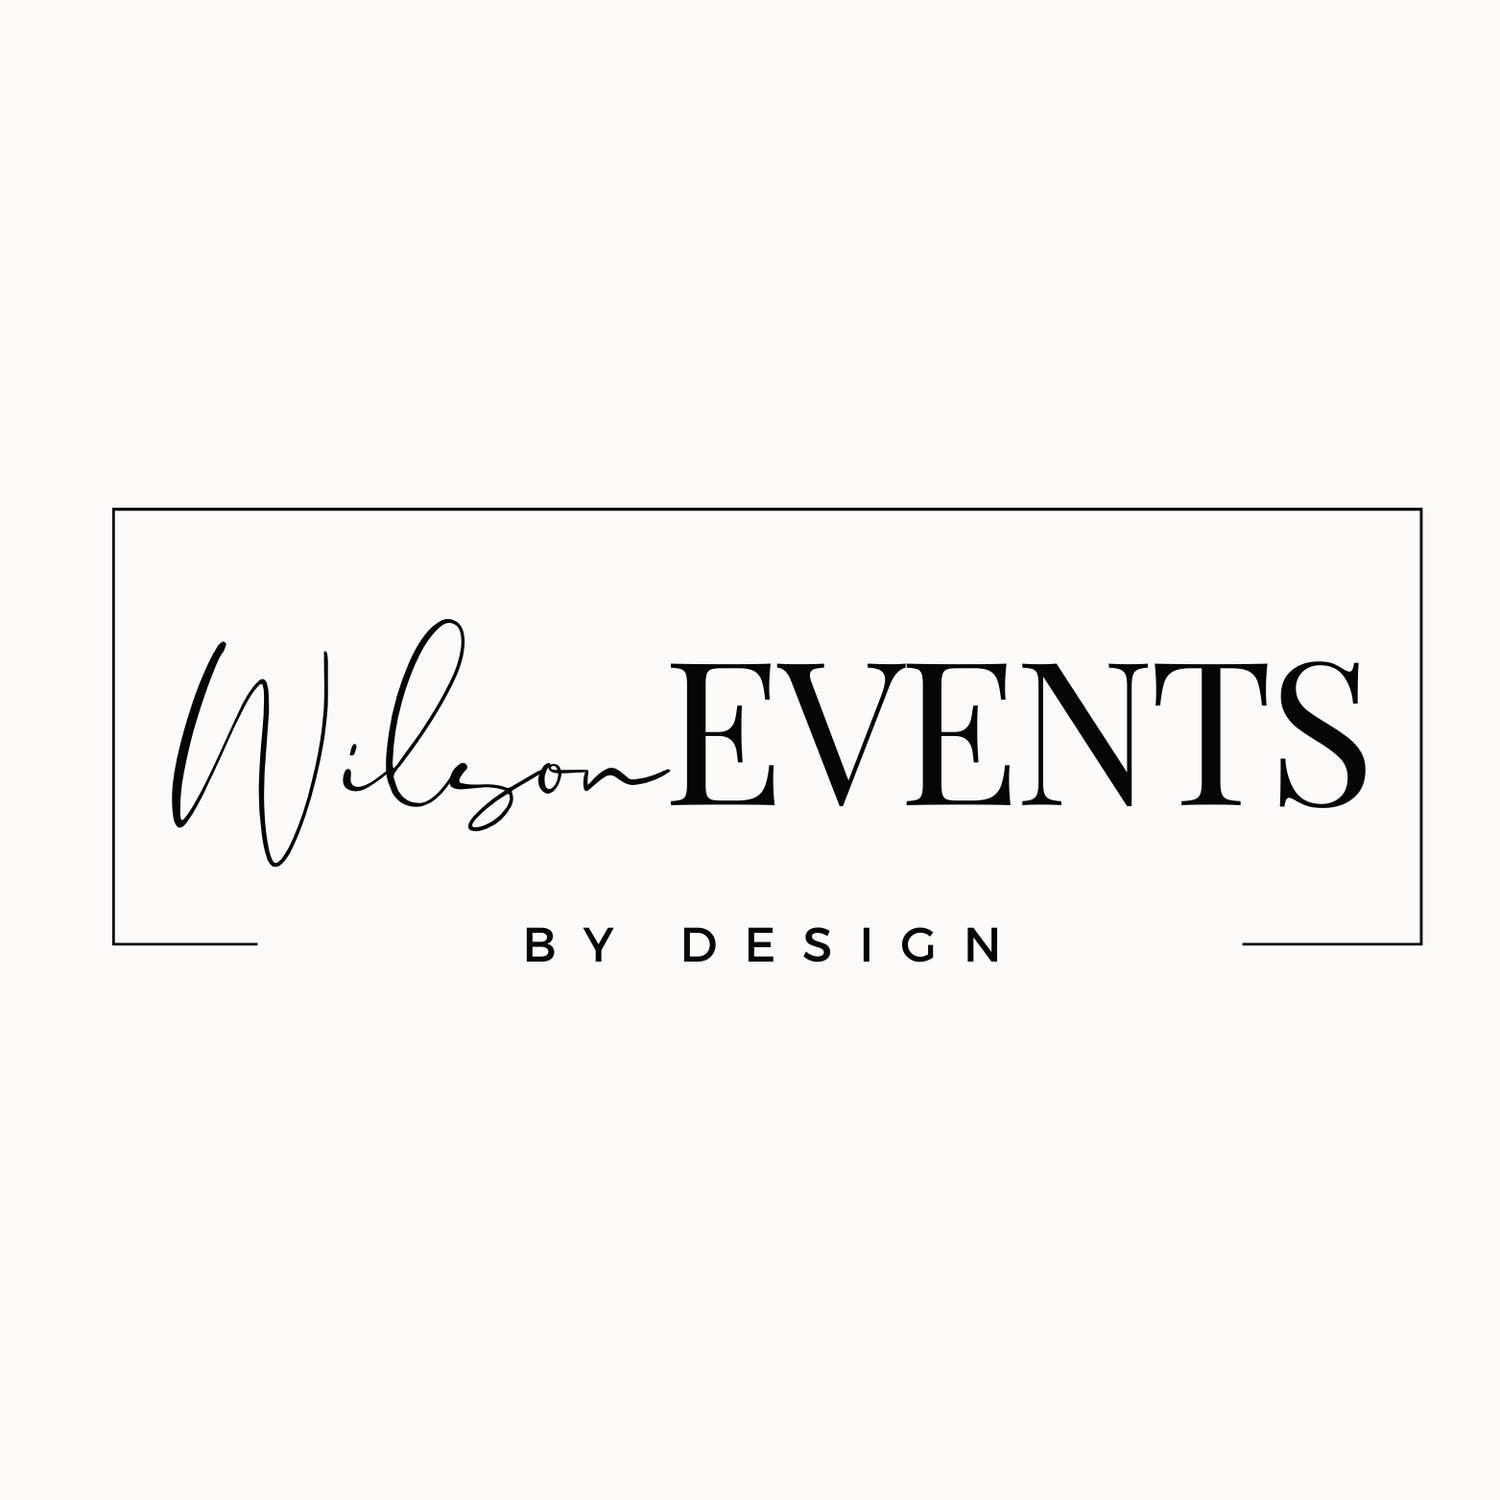 Wilson Events by Design